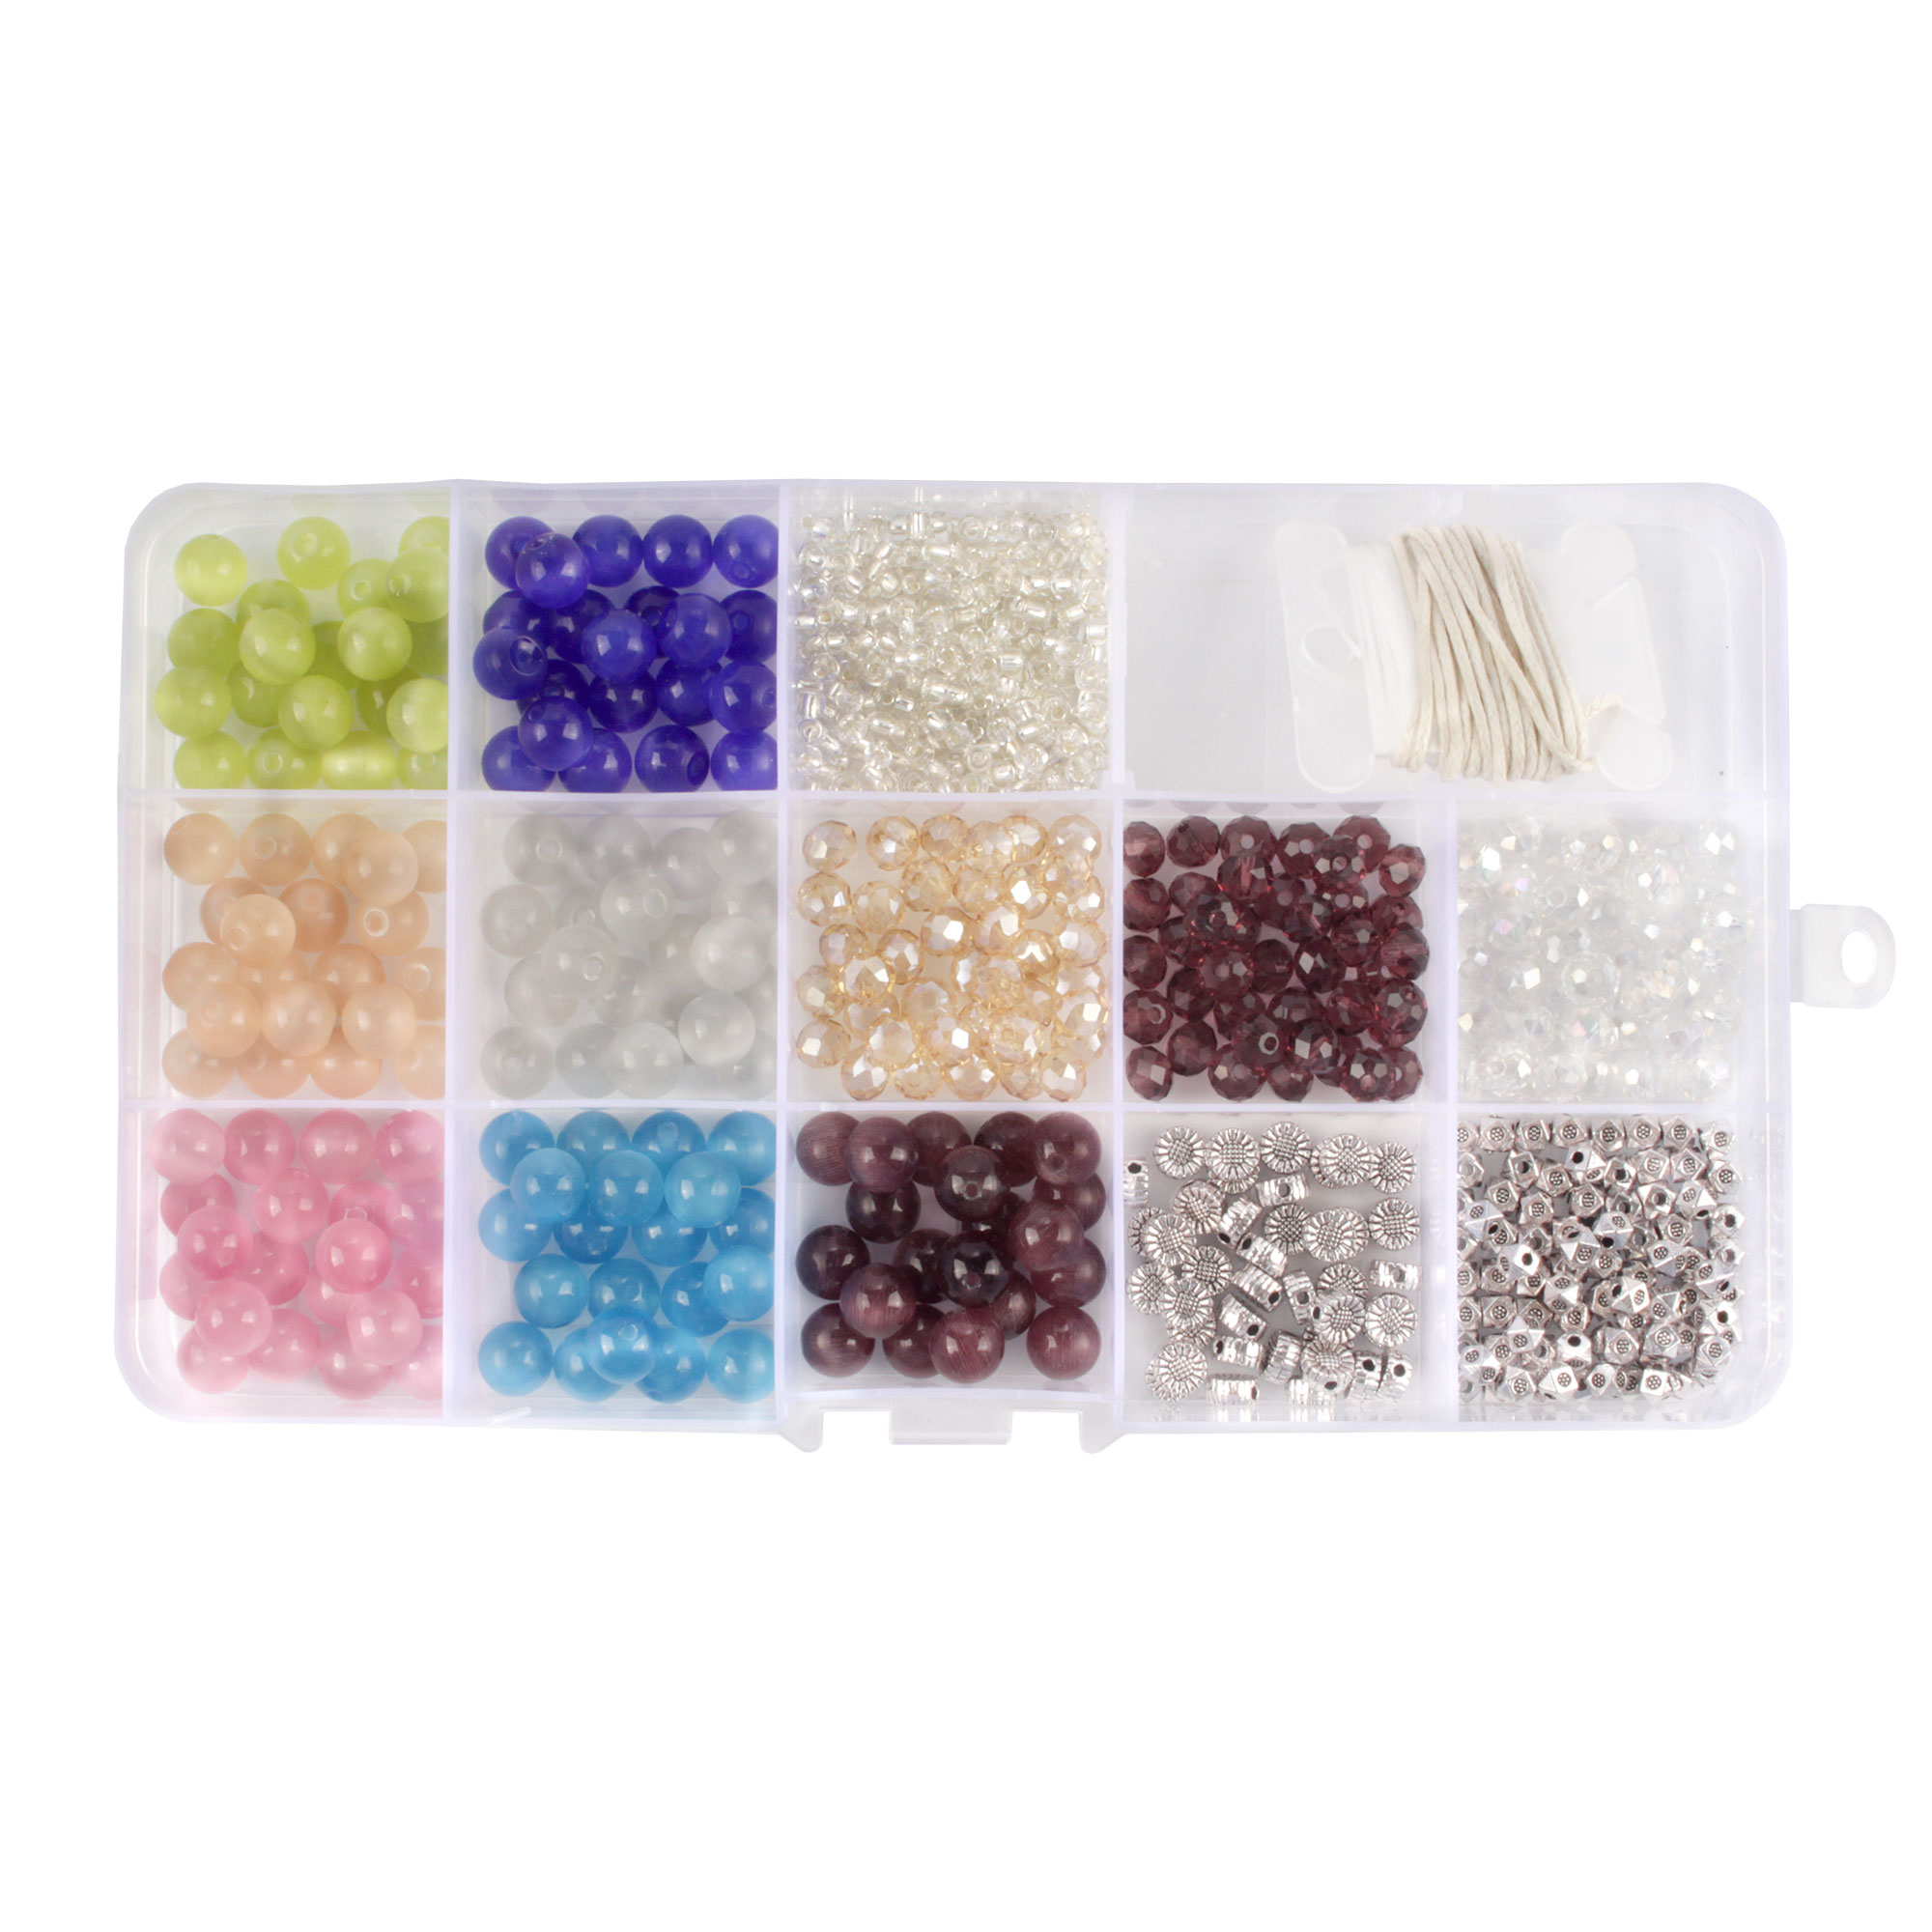 Assorted Bead Kits - DIY Bracelet and Necklace Craft Set - Round Glass  Beads and Alloy Accessories with 3.5m of Wax & Elastic Thread - Assortment  213